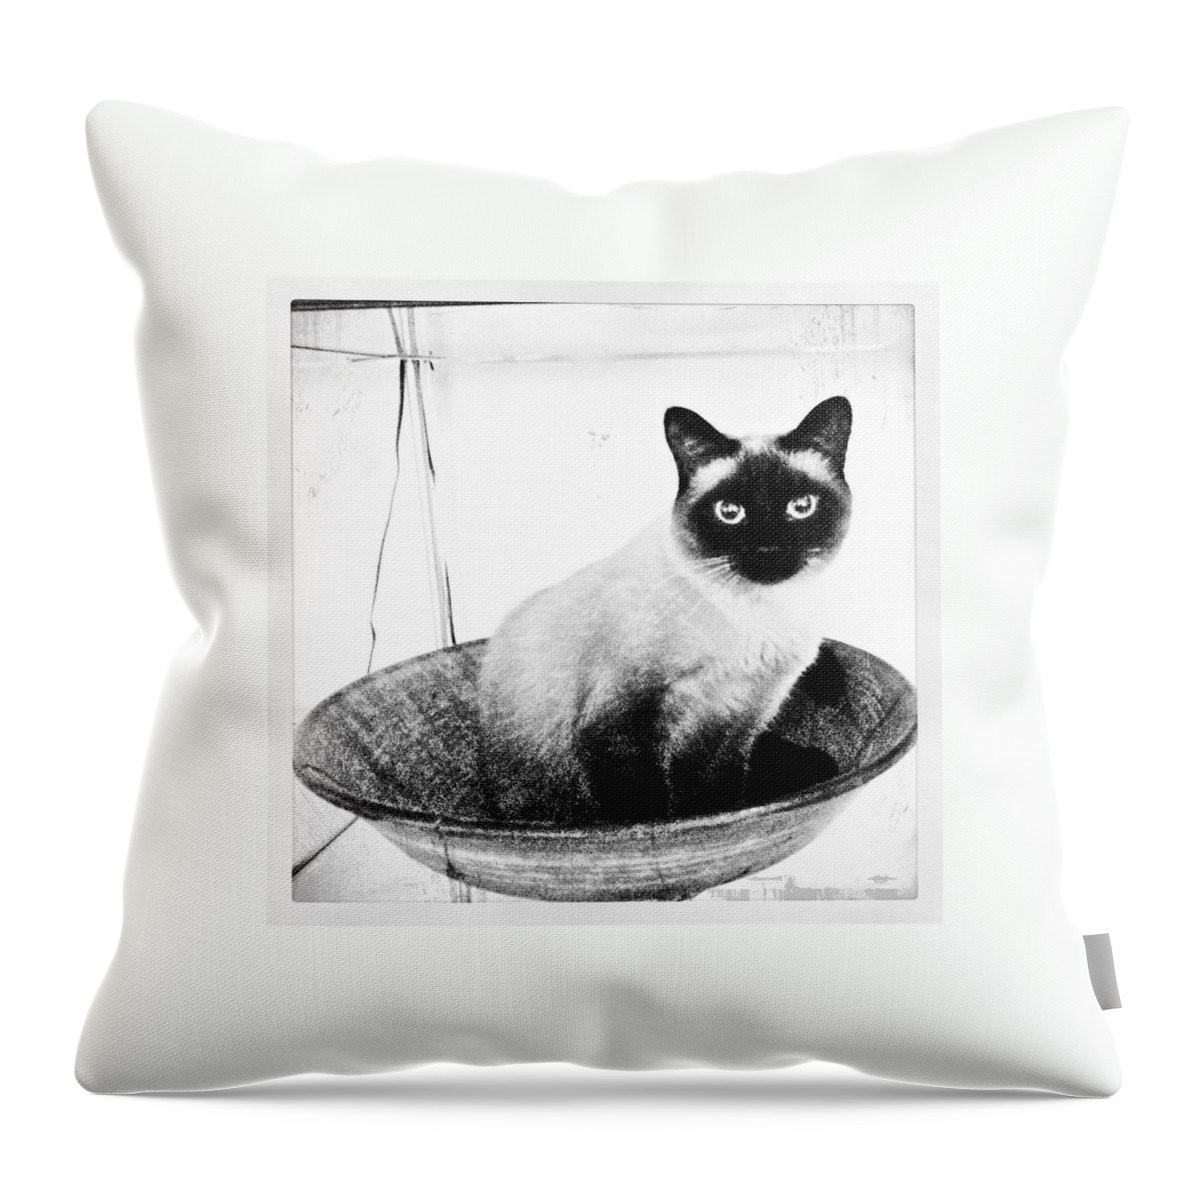 Cat Throw Pillow featuring the photograph Siamese in a Bowl #2 by Natasha Marco